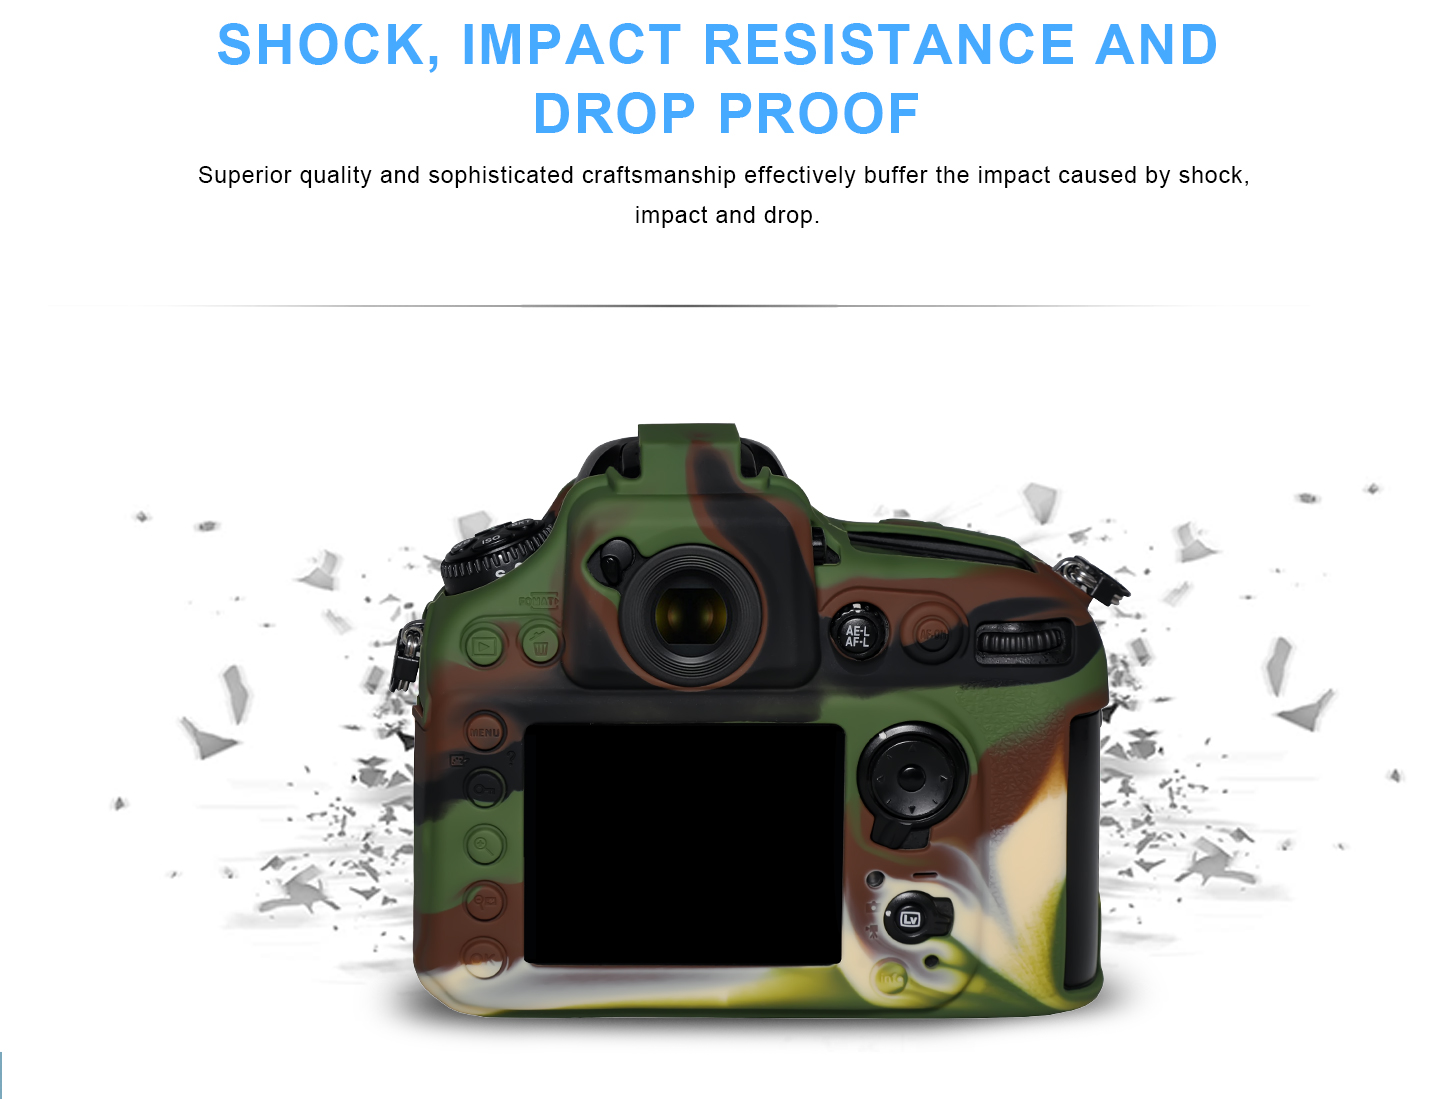 SHOCK, IMPACT RESISTANCE AND DROP PROOF